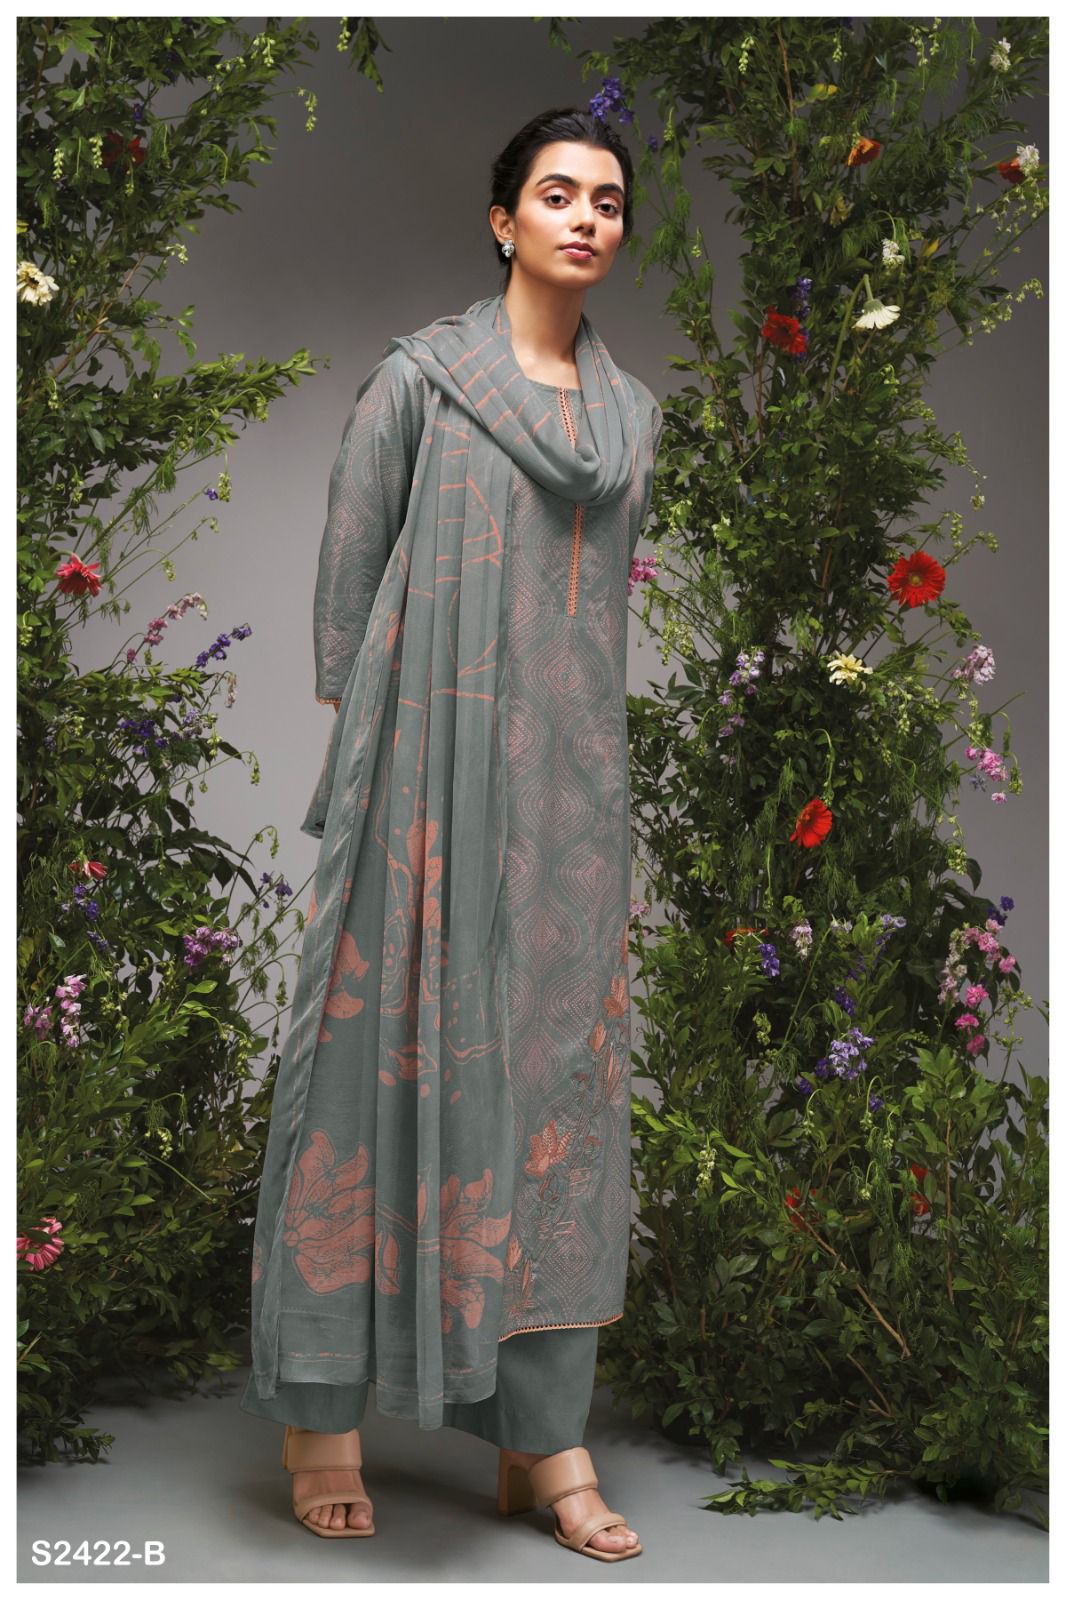 Ganga Shan 2422D - Premium Cotton Printed With Embroidery & Lace Work Suit